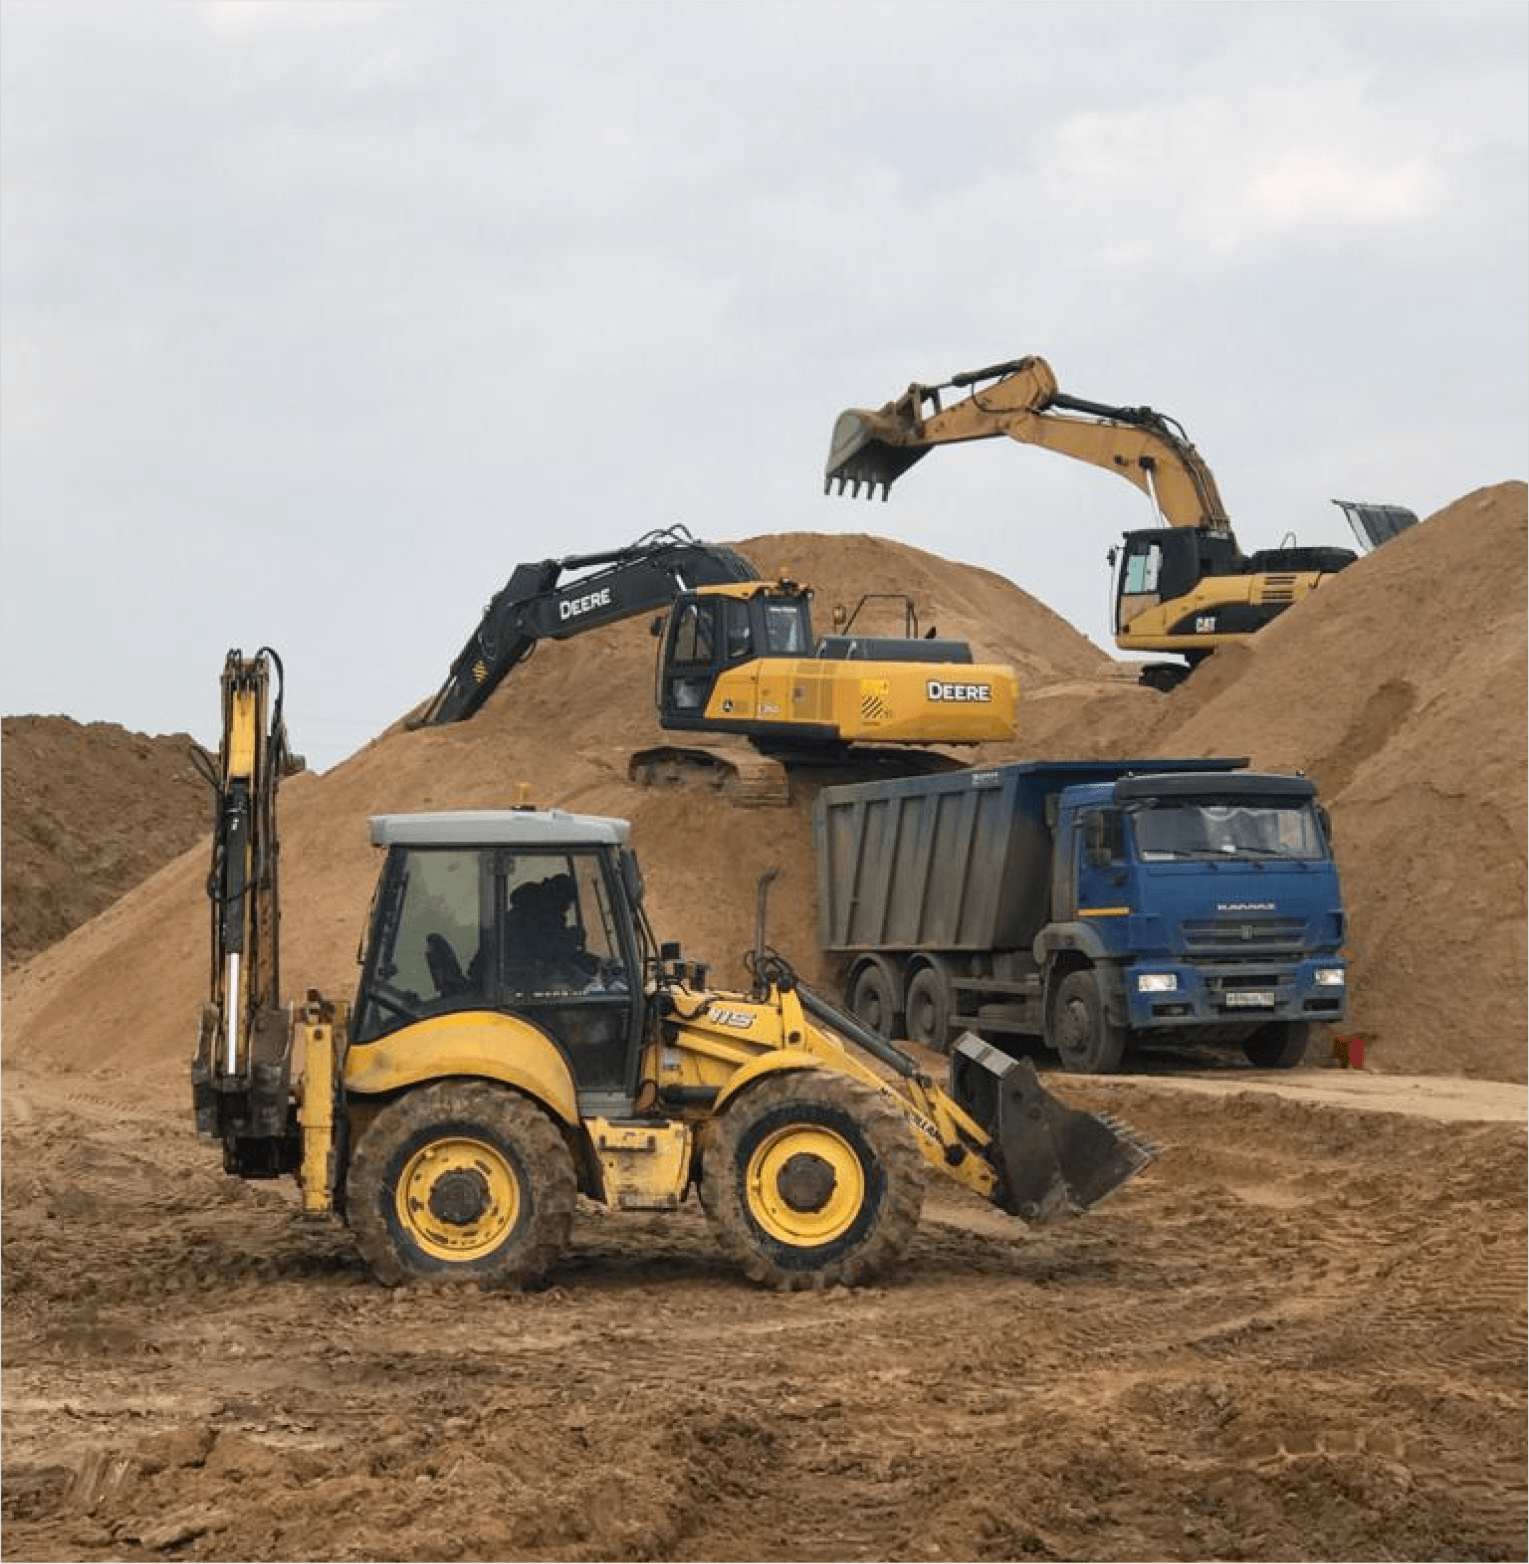 construction machinery located among the sand